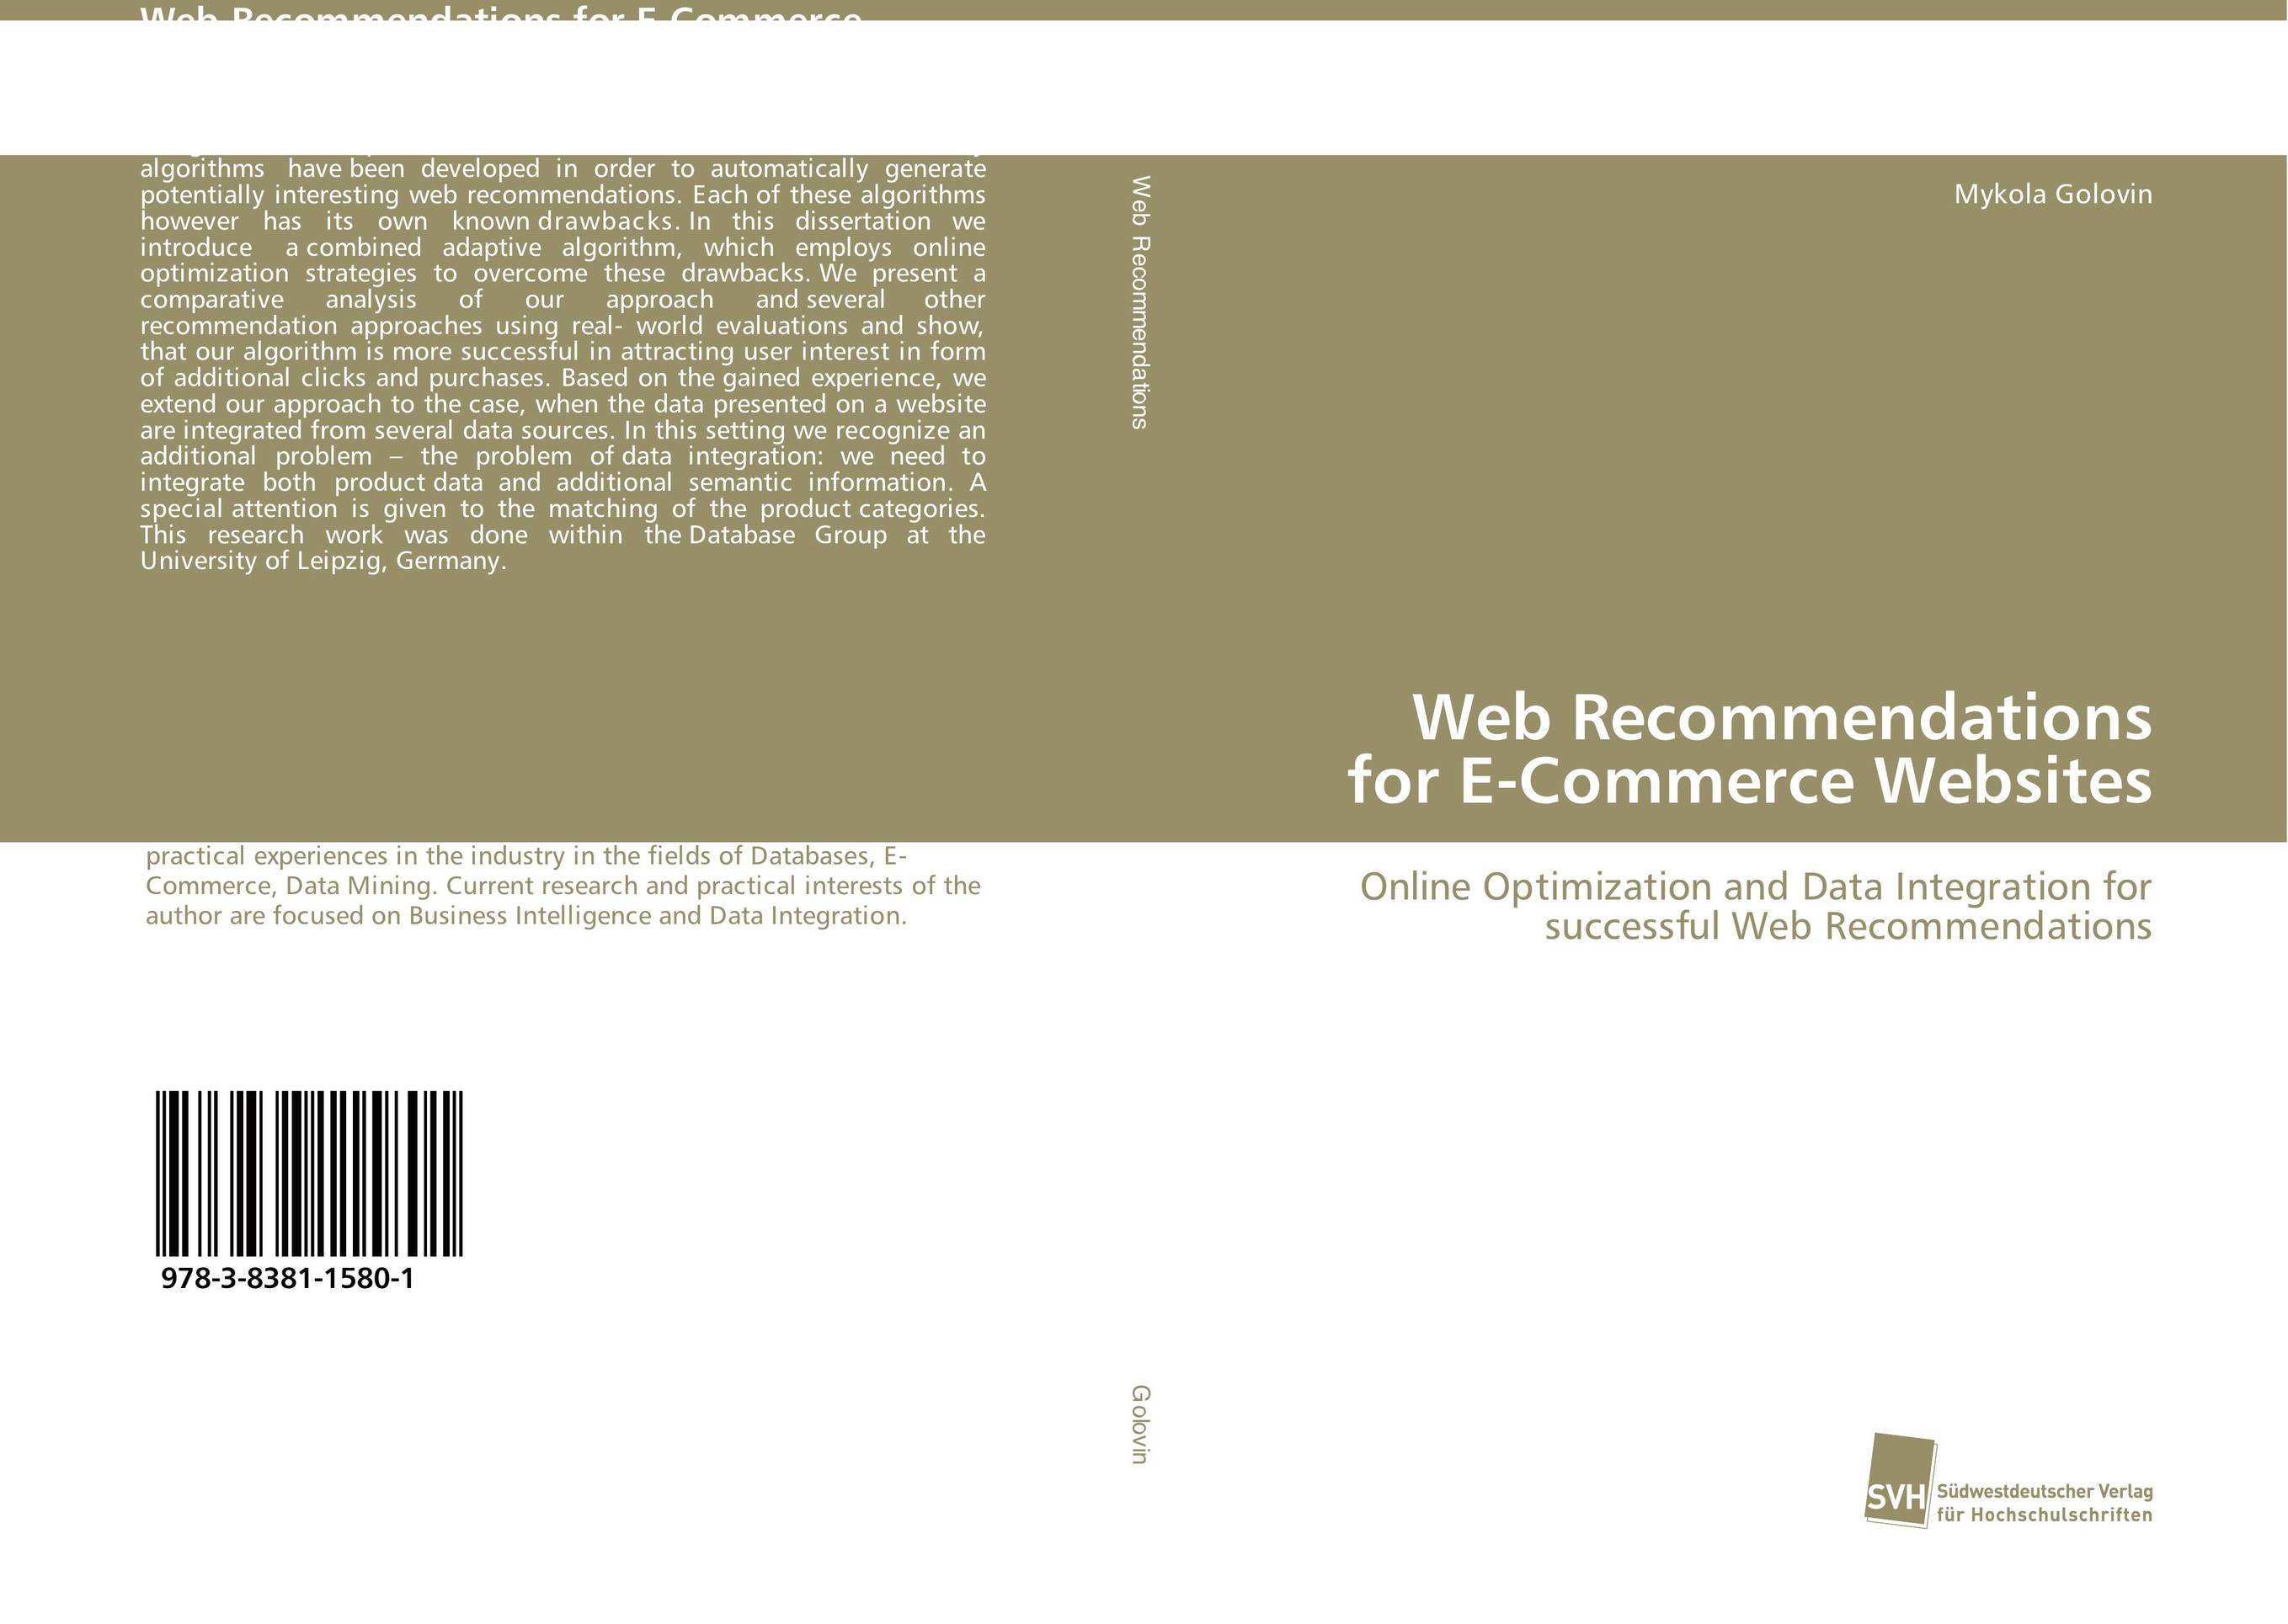 Web Recommendations for E-Commerce Websites